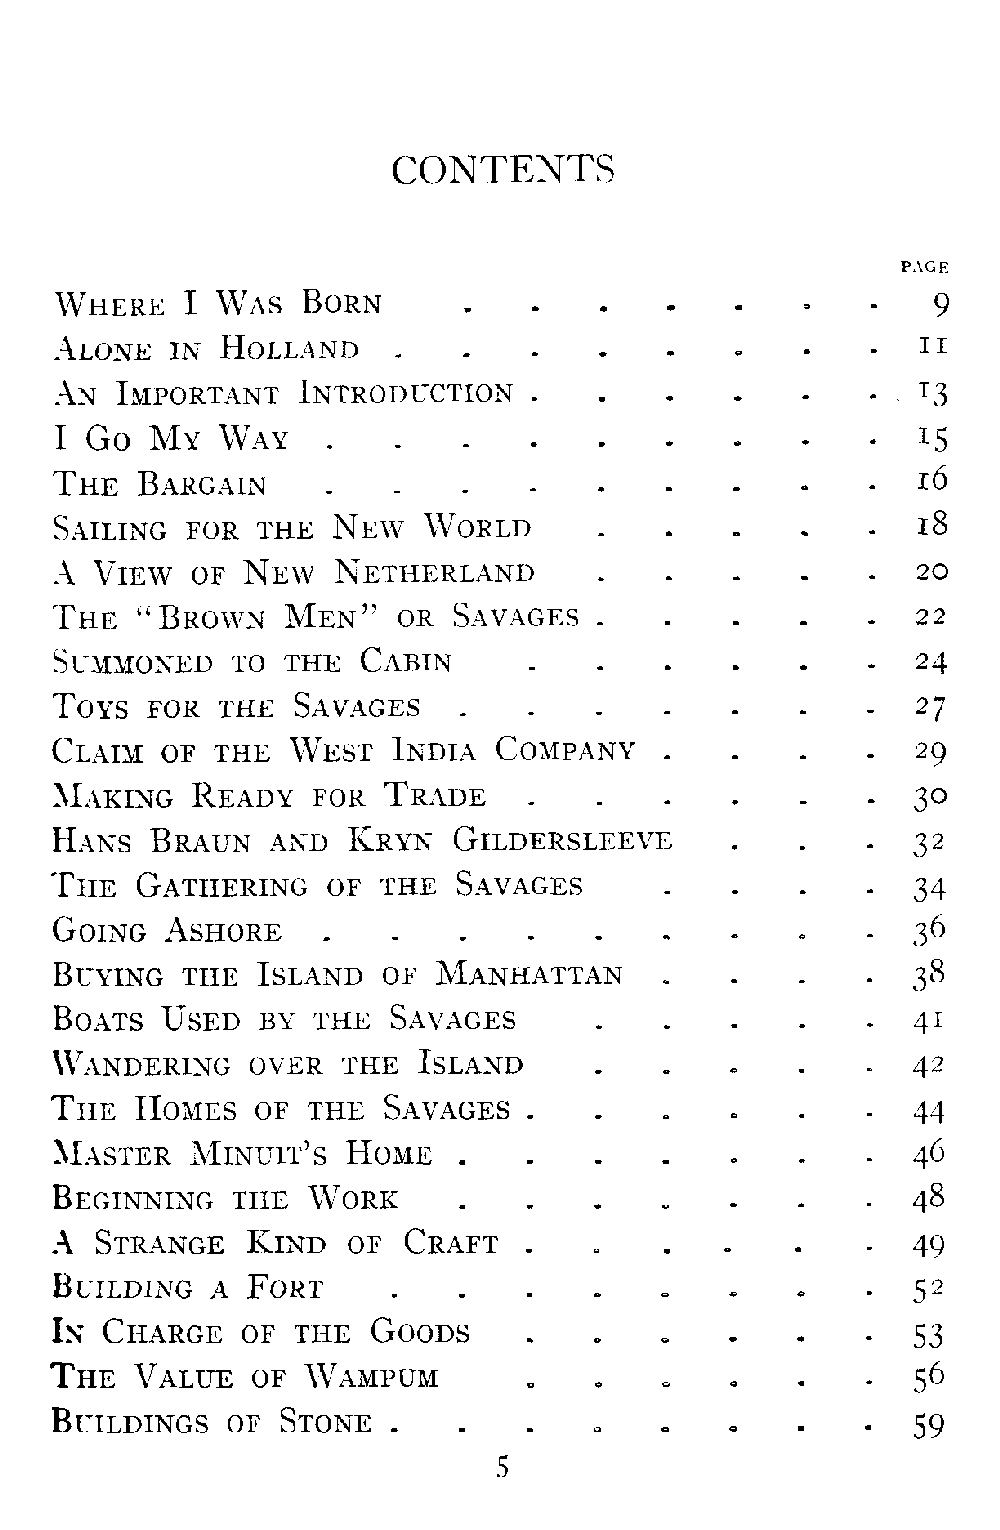 [Contents Page 1 of 5] from Peter of New Amsterdam by James Otis